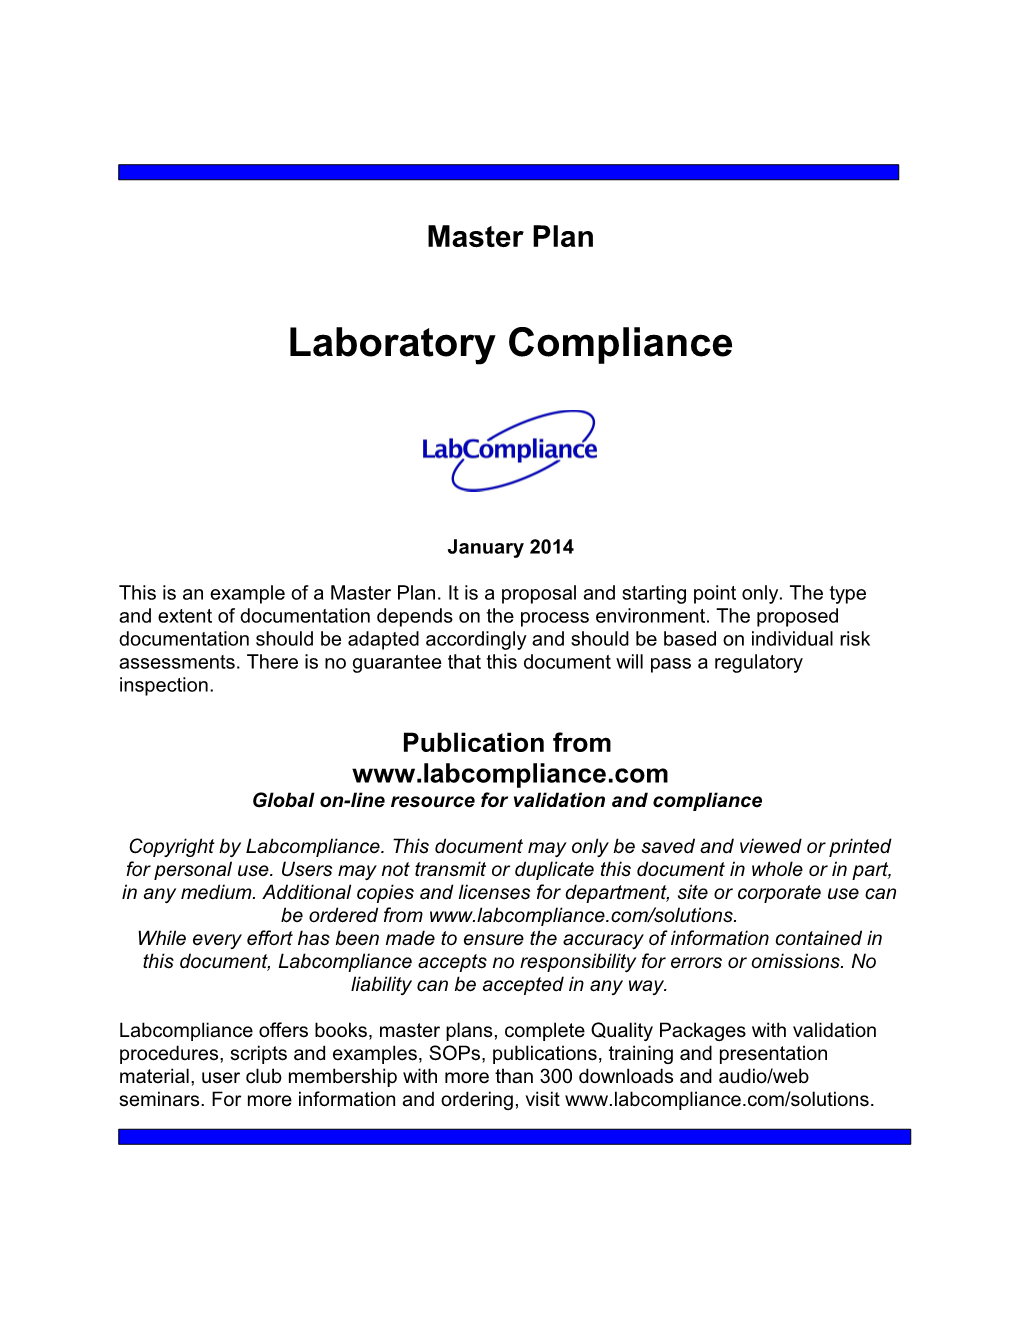 Global On-Line Resource for Validation and Compliance